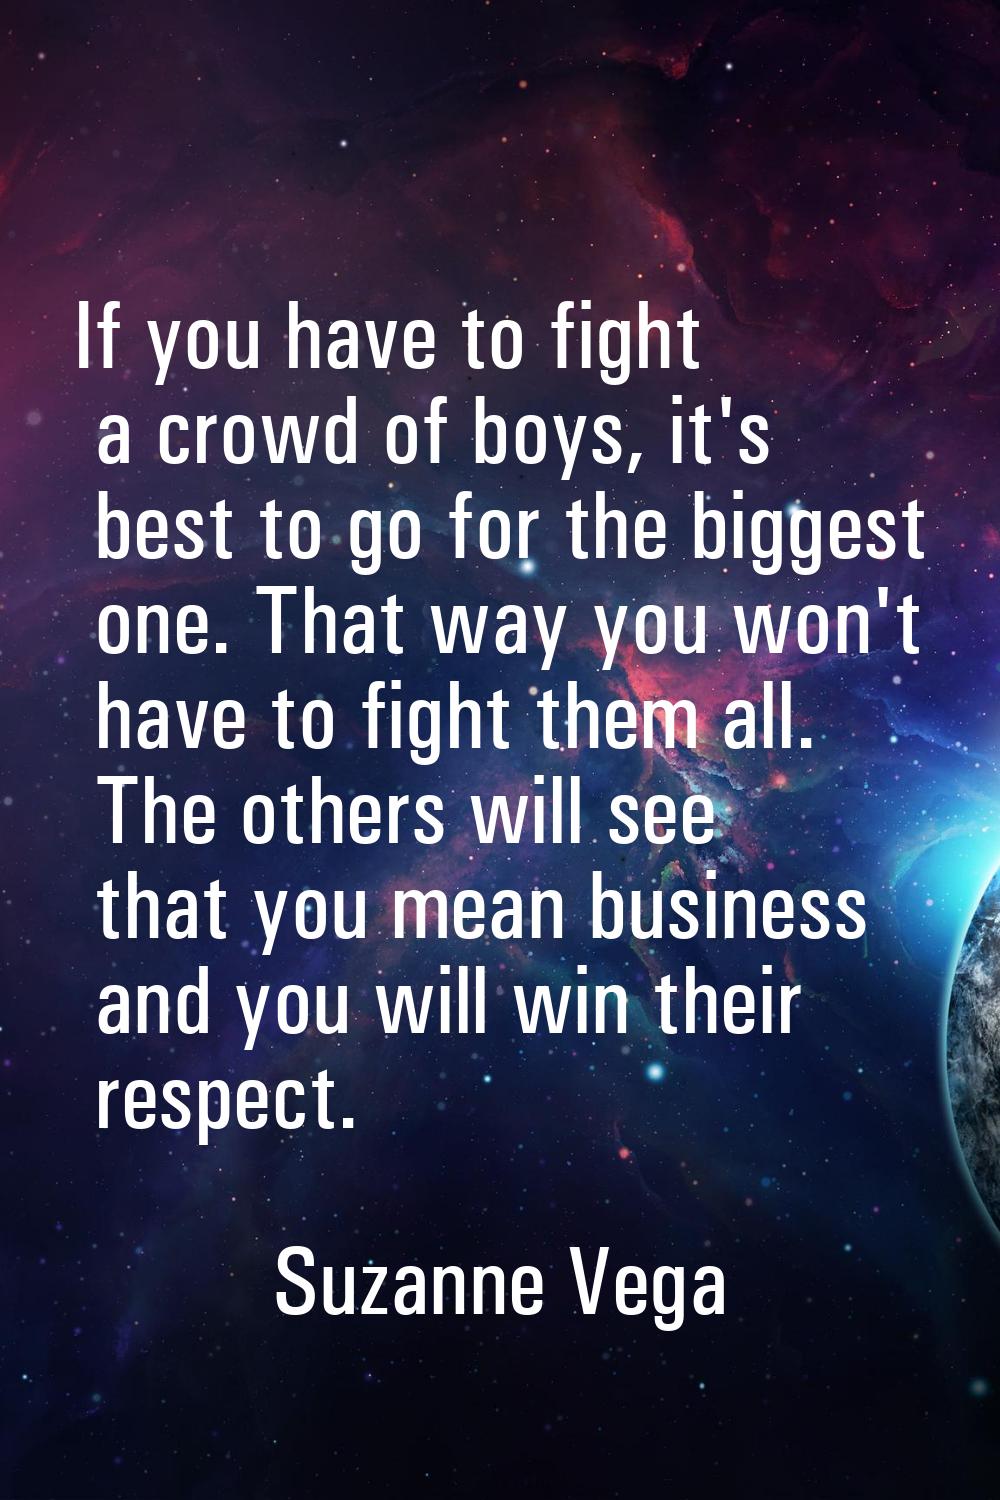 If you have to fight a crowd of boys, it's best to go for the biggest one. That way you won't have 